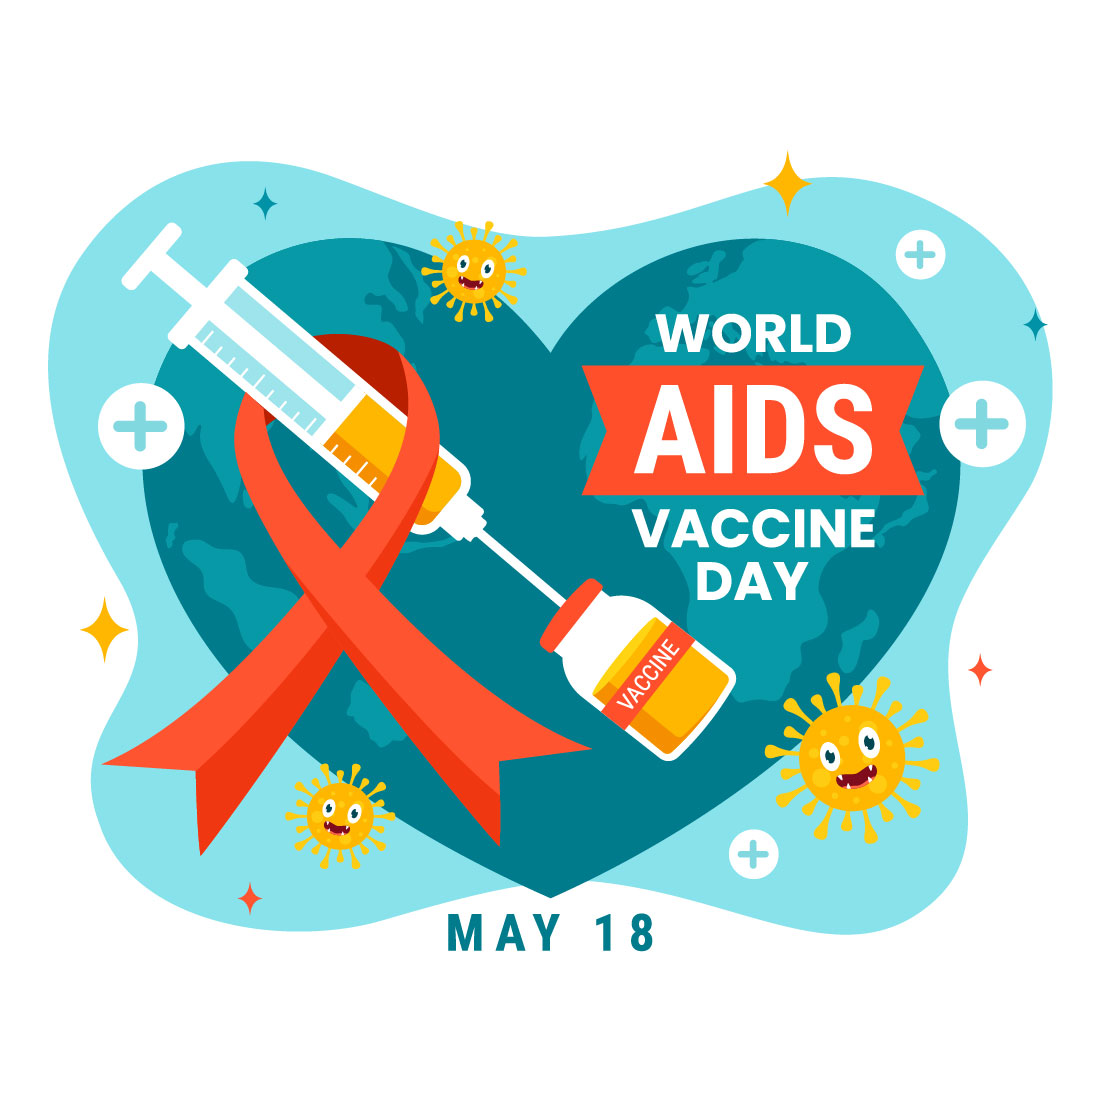 12 World Aids Vaccine Day Illustration preview image.